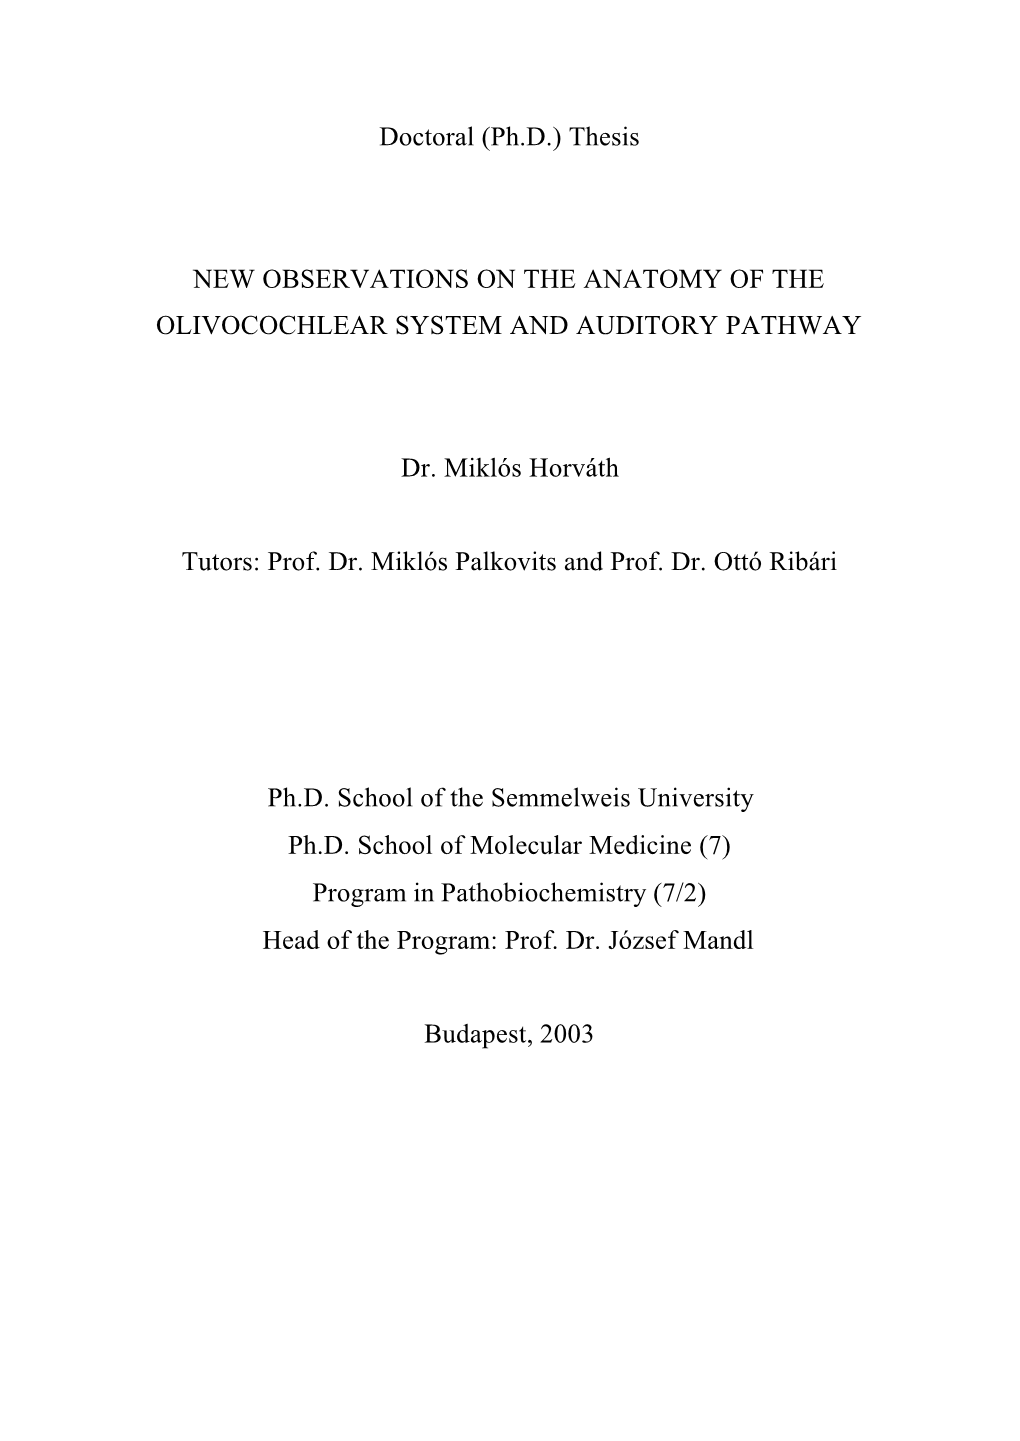 Doctoral (Ph.D.) Thesis NEW OBSERVATIONS on THE